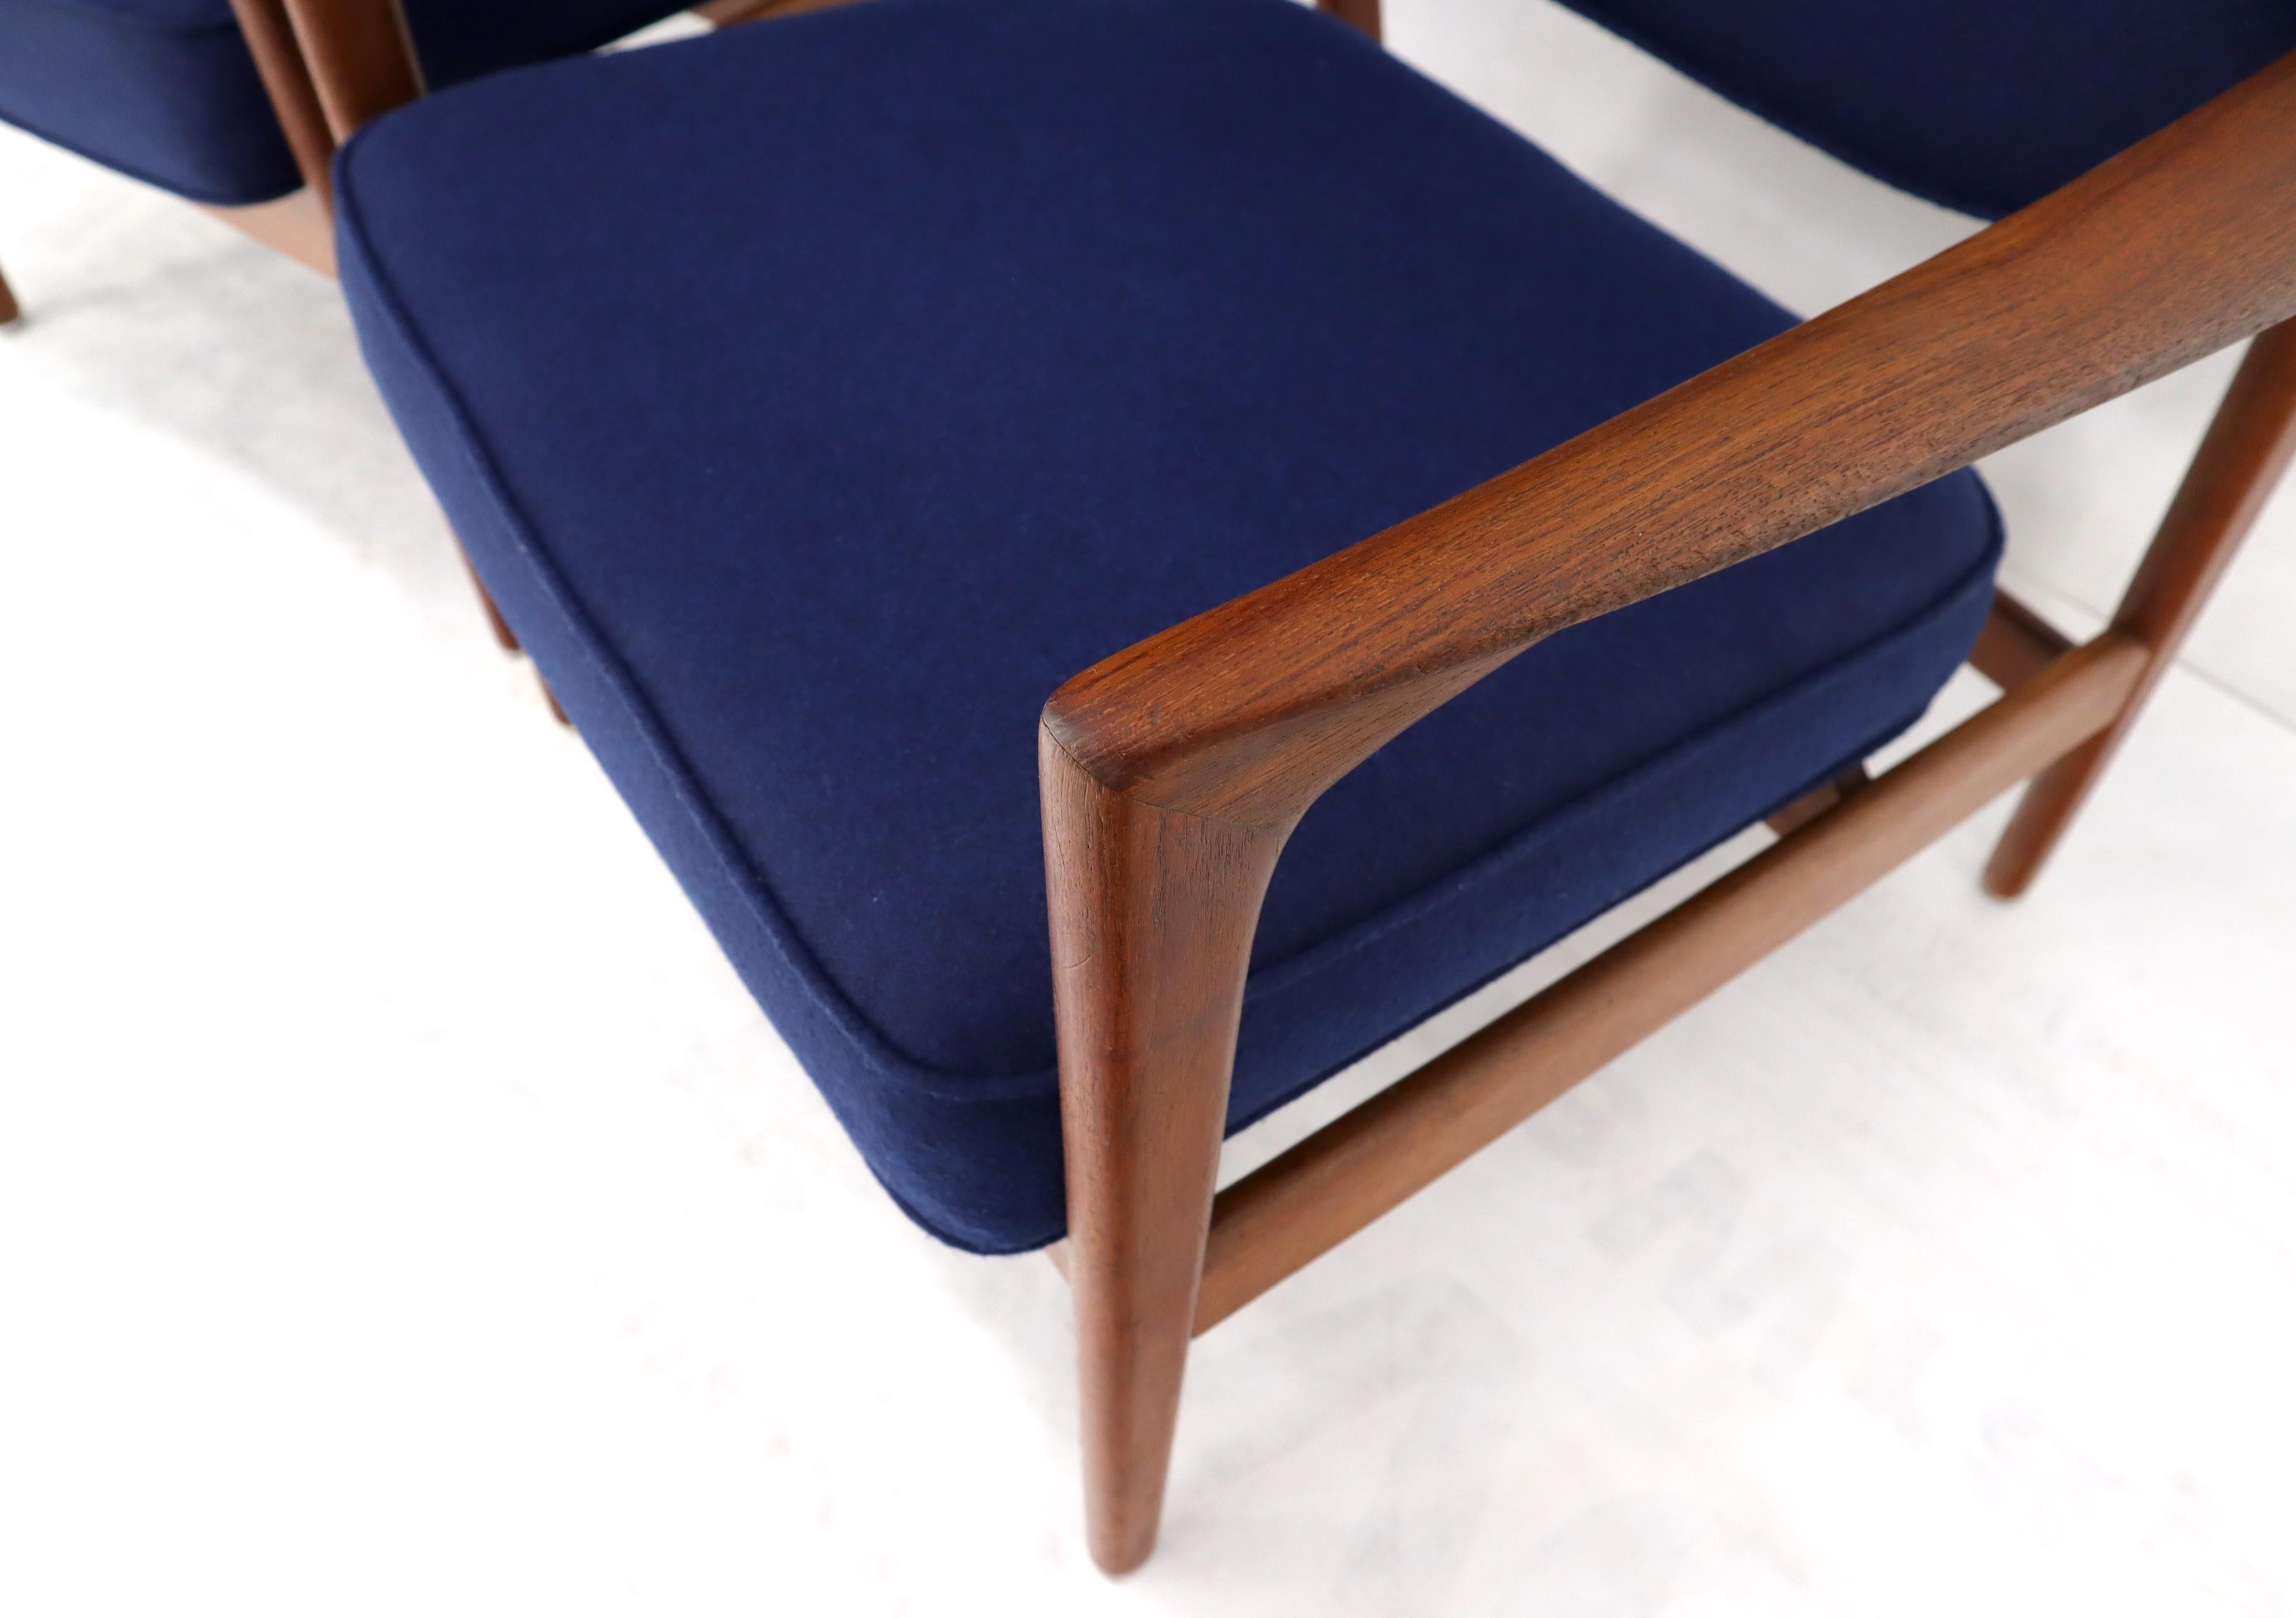 Pair of New Blue Upholstery Teak Danish Mid-Century Modern Arm Lounge Chairs For Sale 4